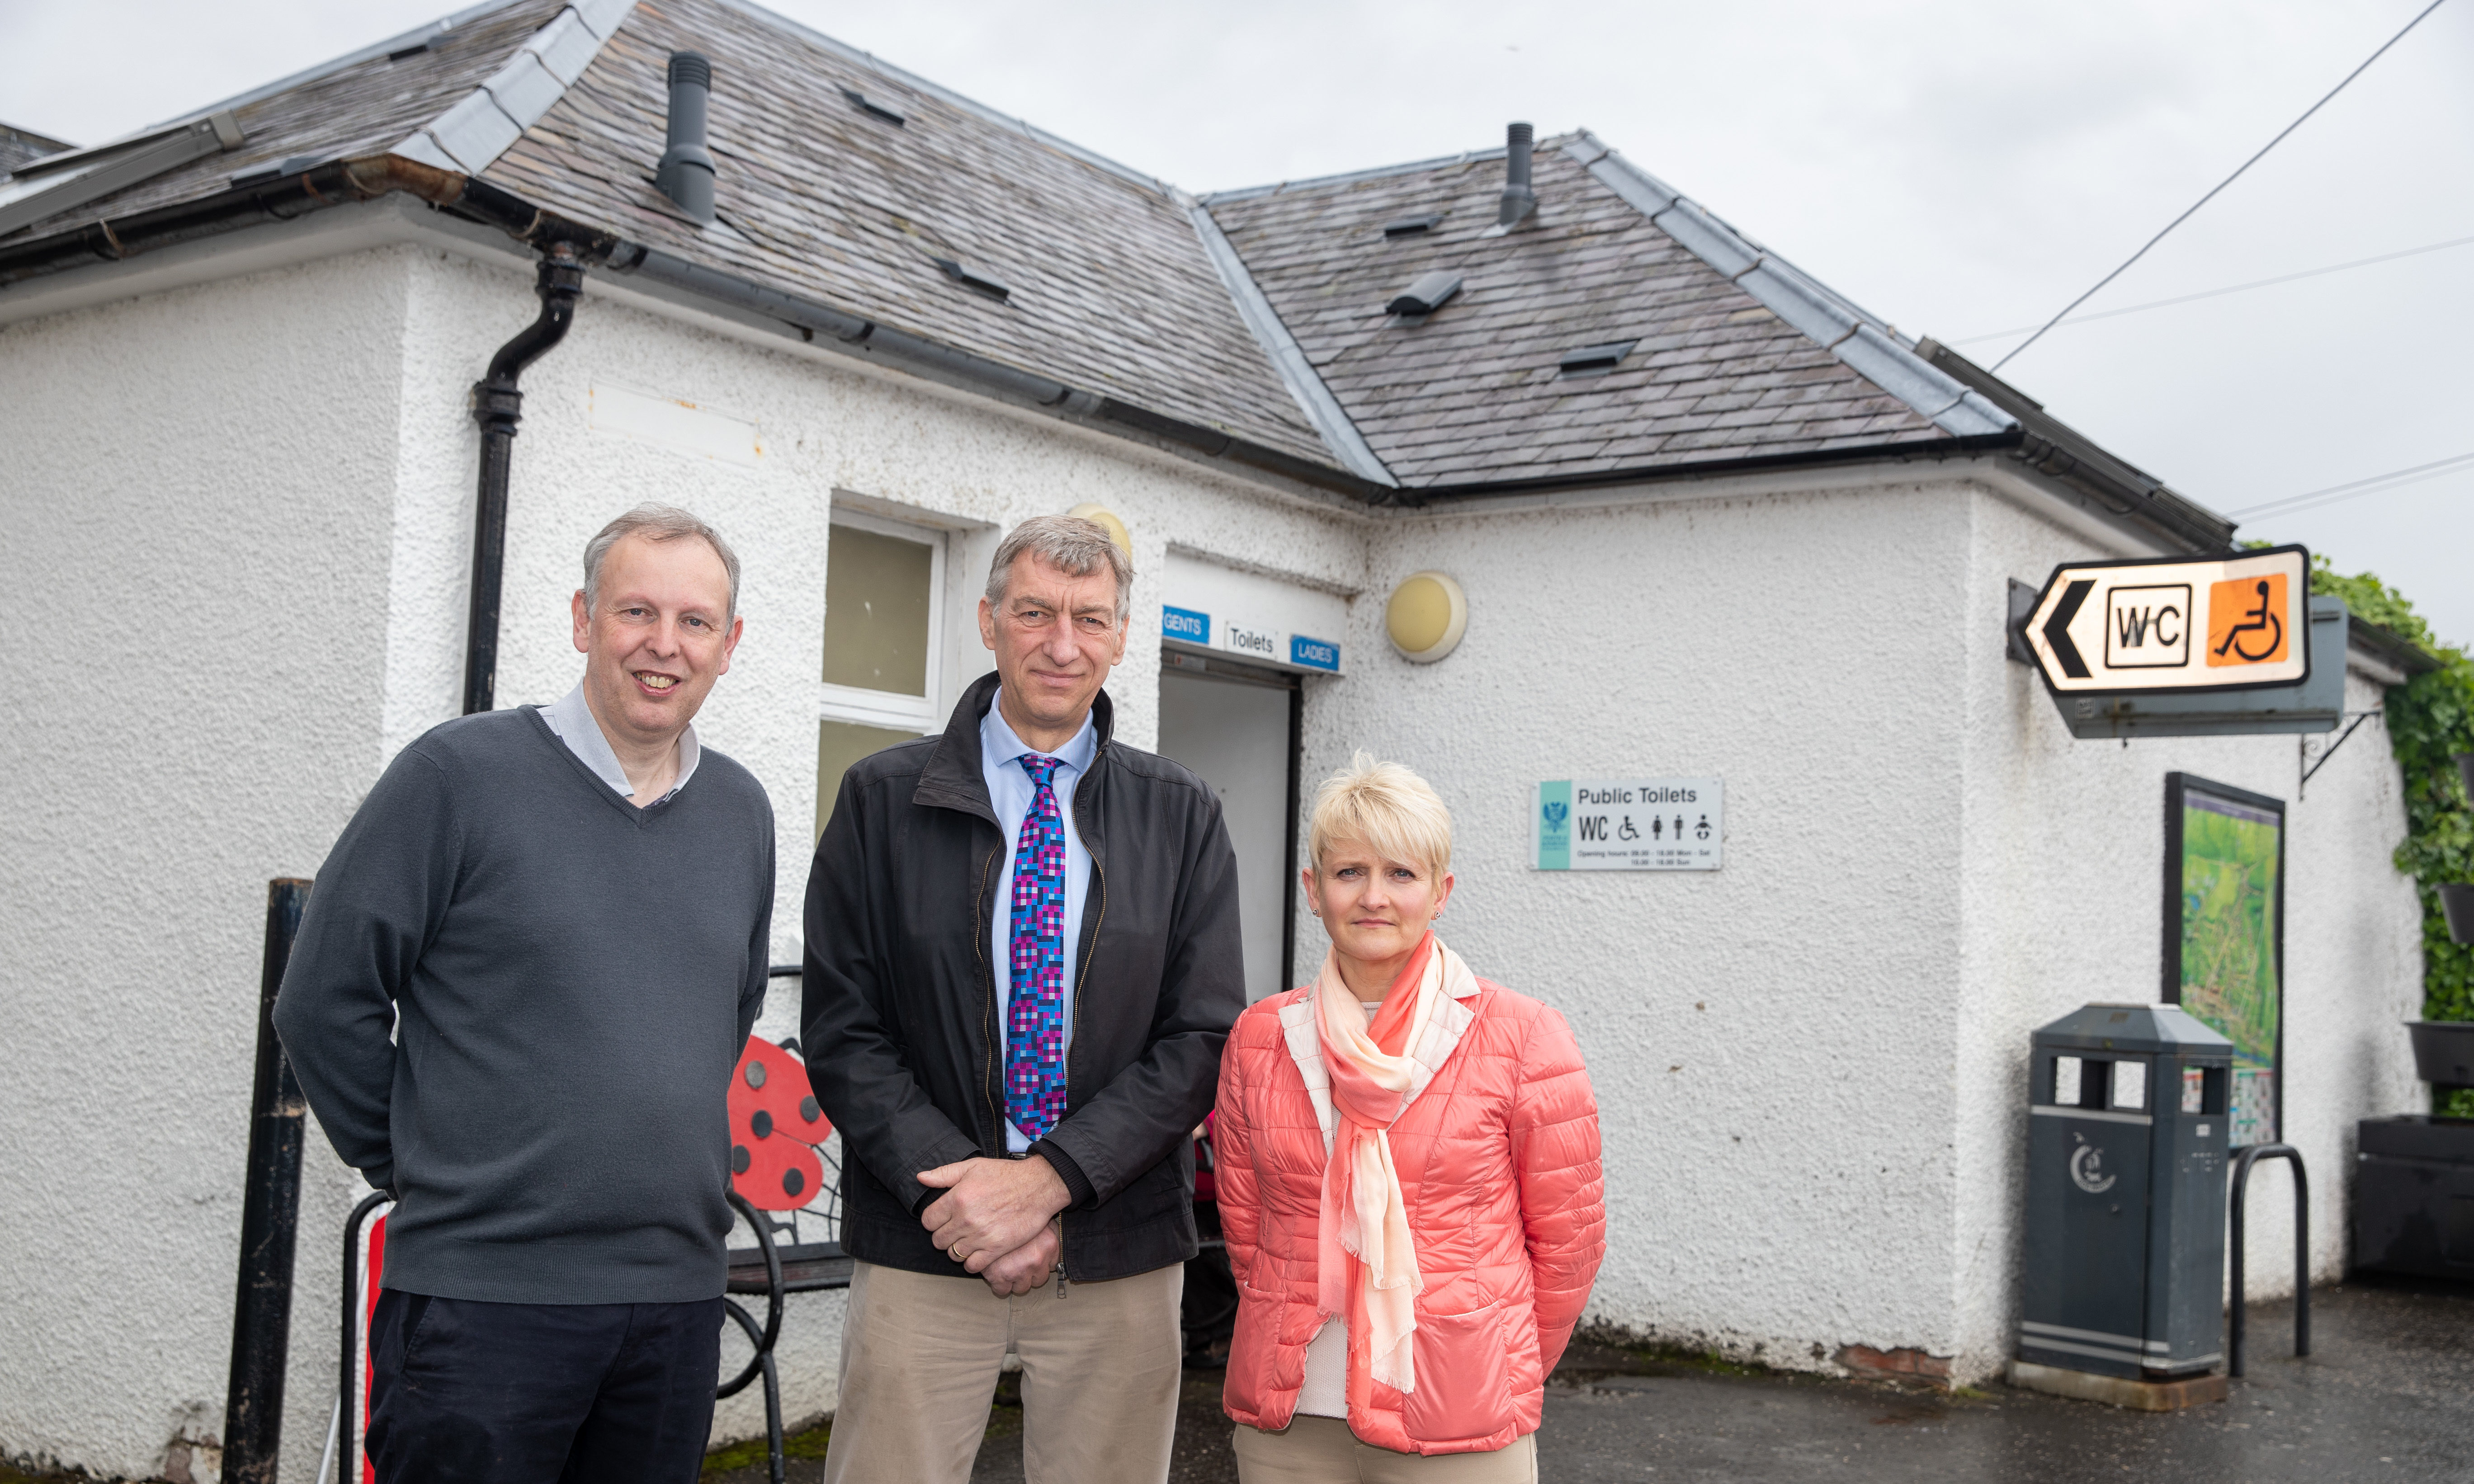 Business owners Mark Wood and Natalie Johnson and Cllr Mike Williamson are campaigning to extend the opening hours of the public toilets  in Pitlochry.